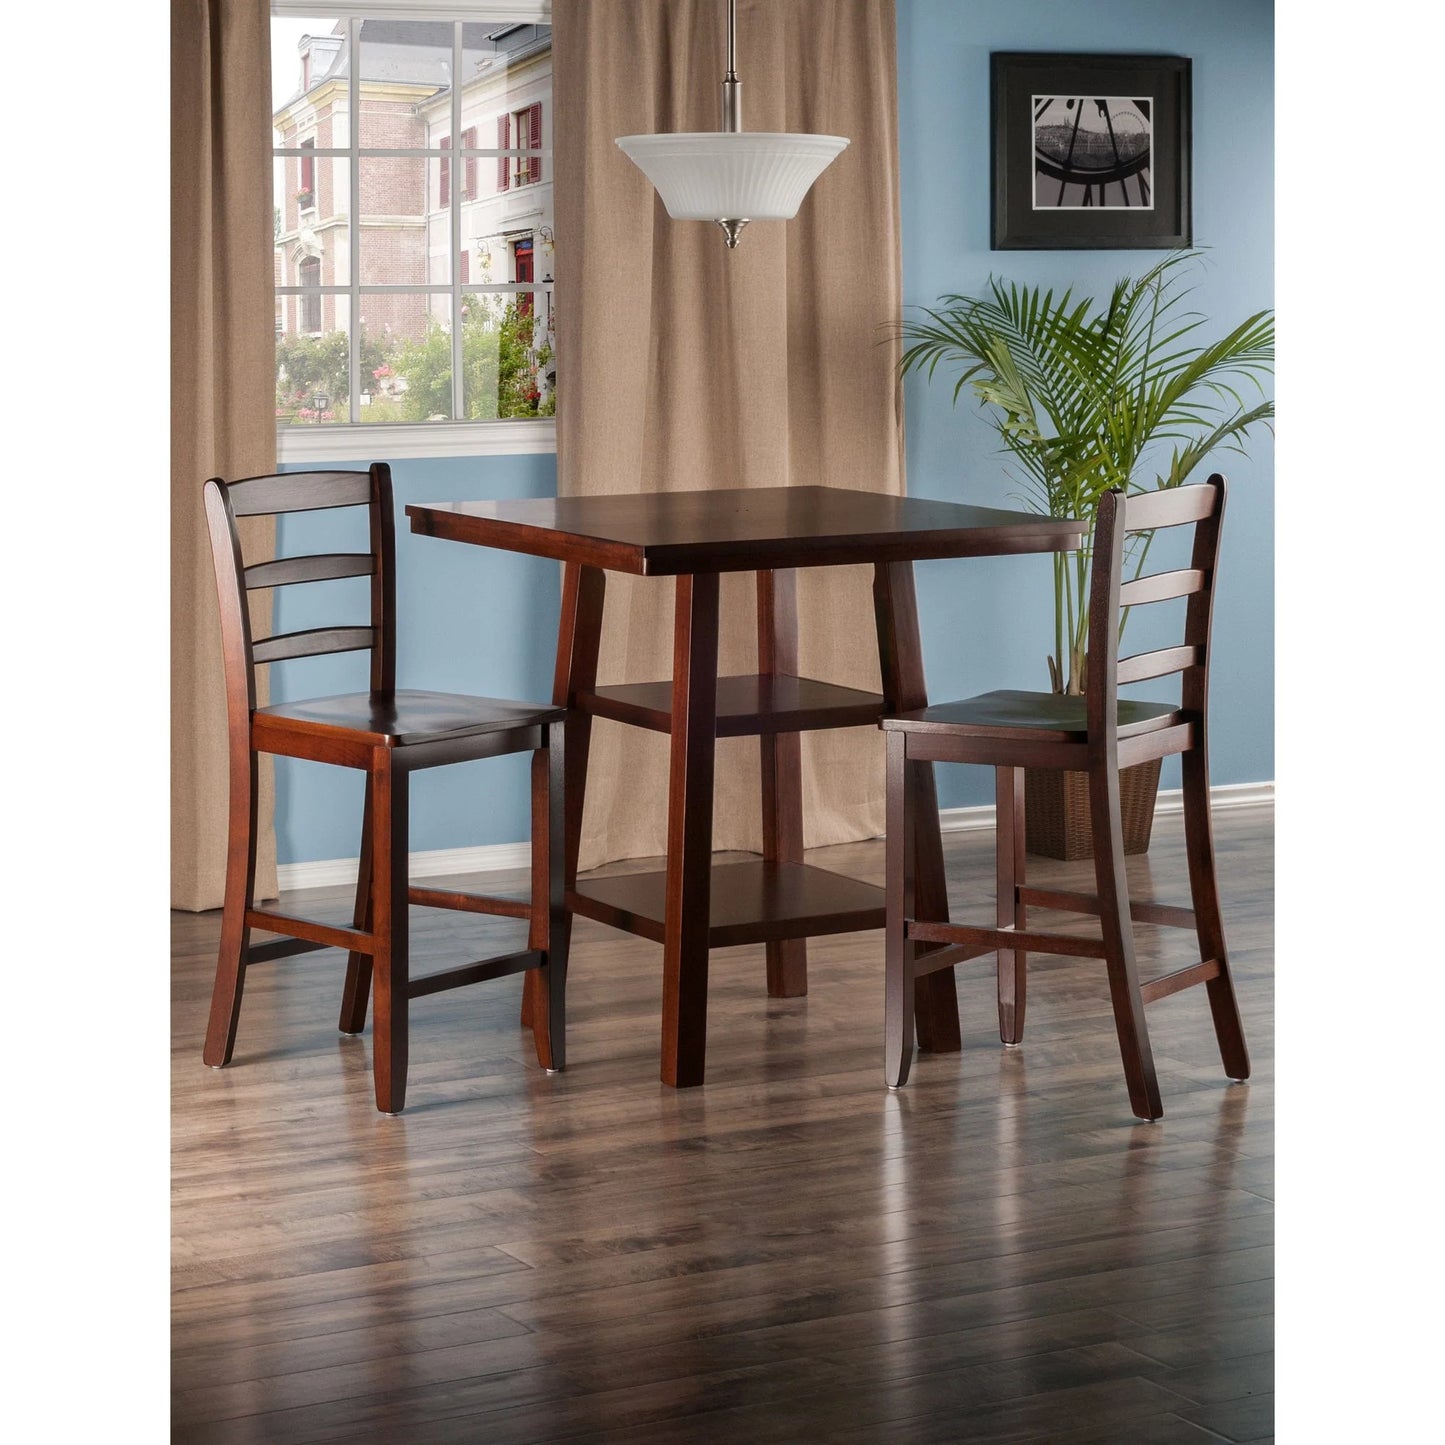 WINSOME Pub Table Set Orlando 3-Pc High Table with Ladder-back Counter Stools, Walnut